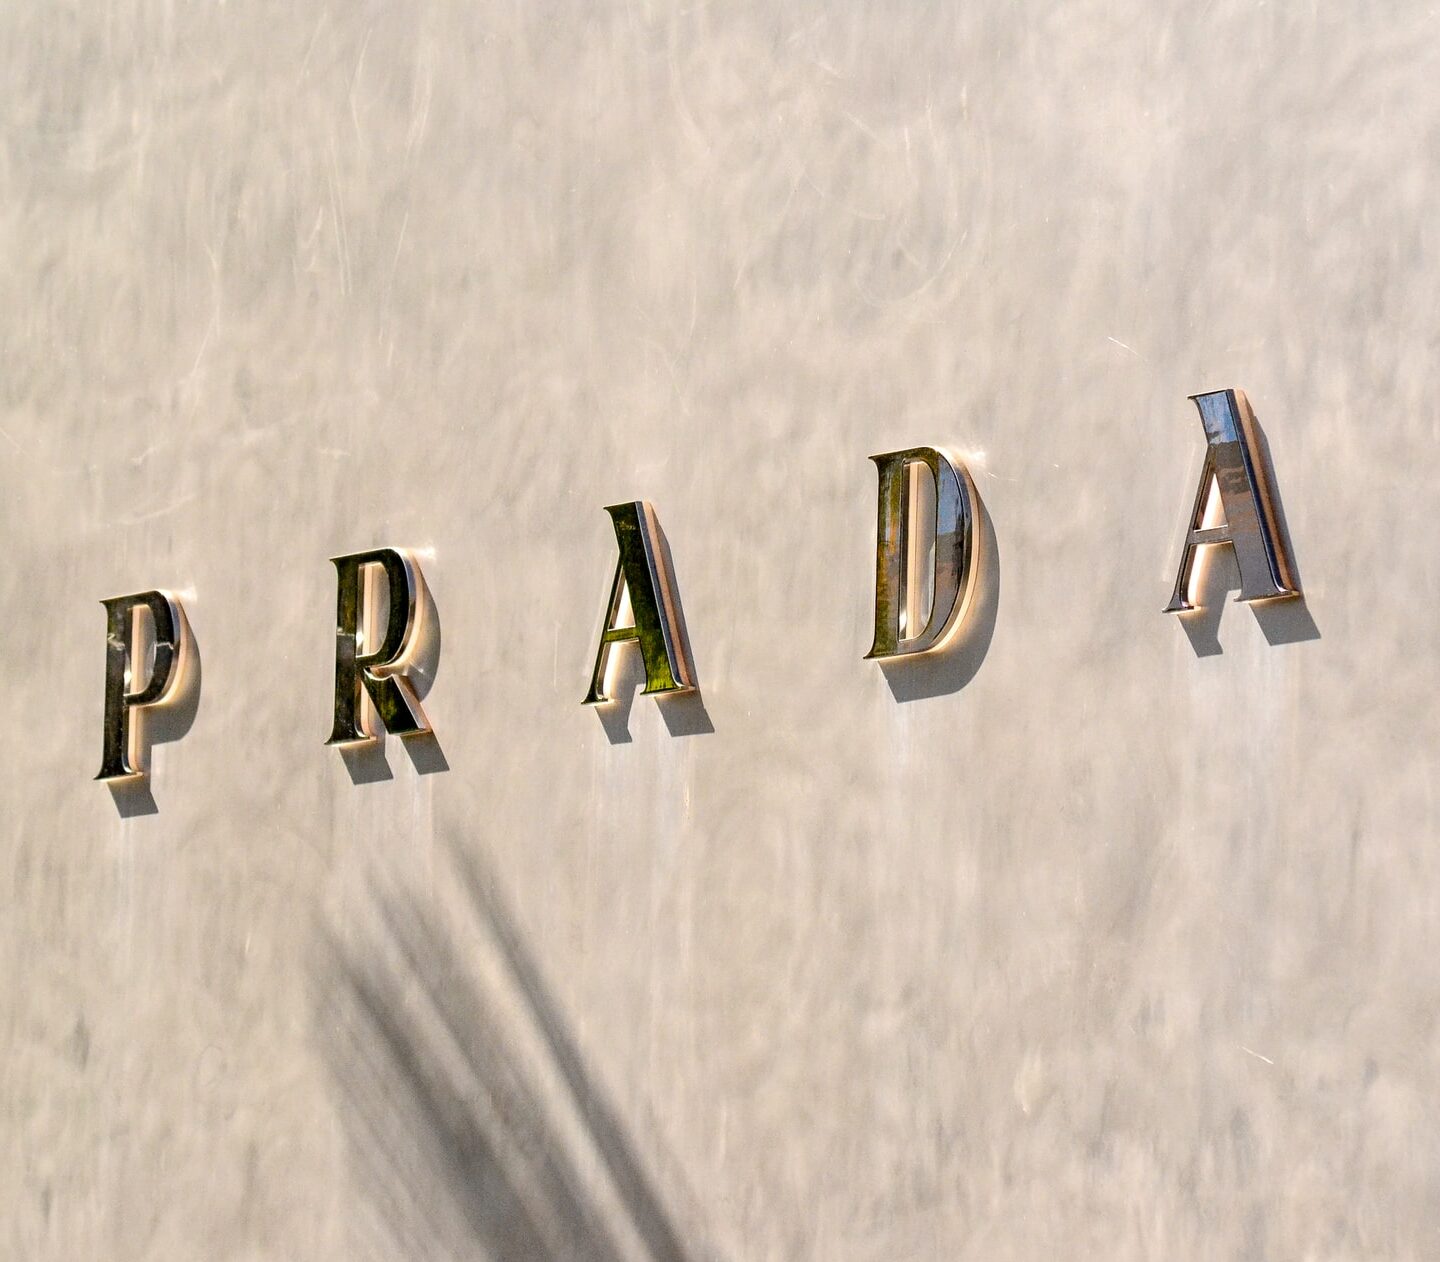 How Prada Became One of the Most Coveted Fashion Brands in the World